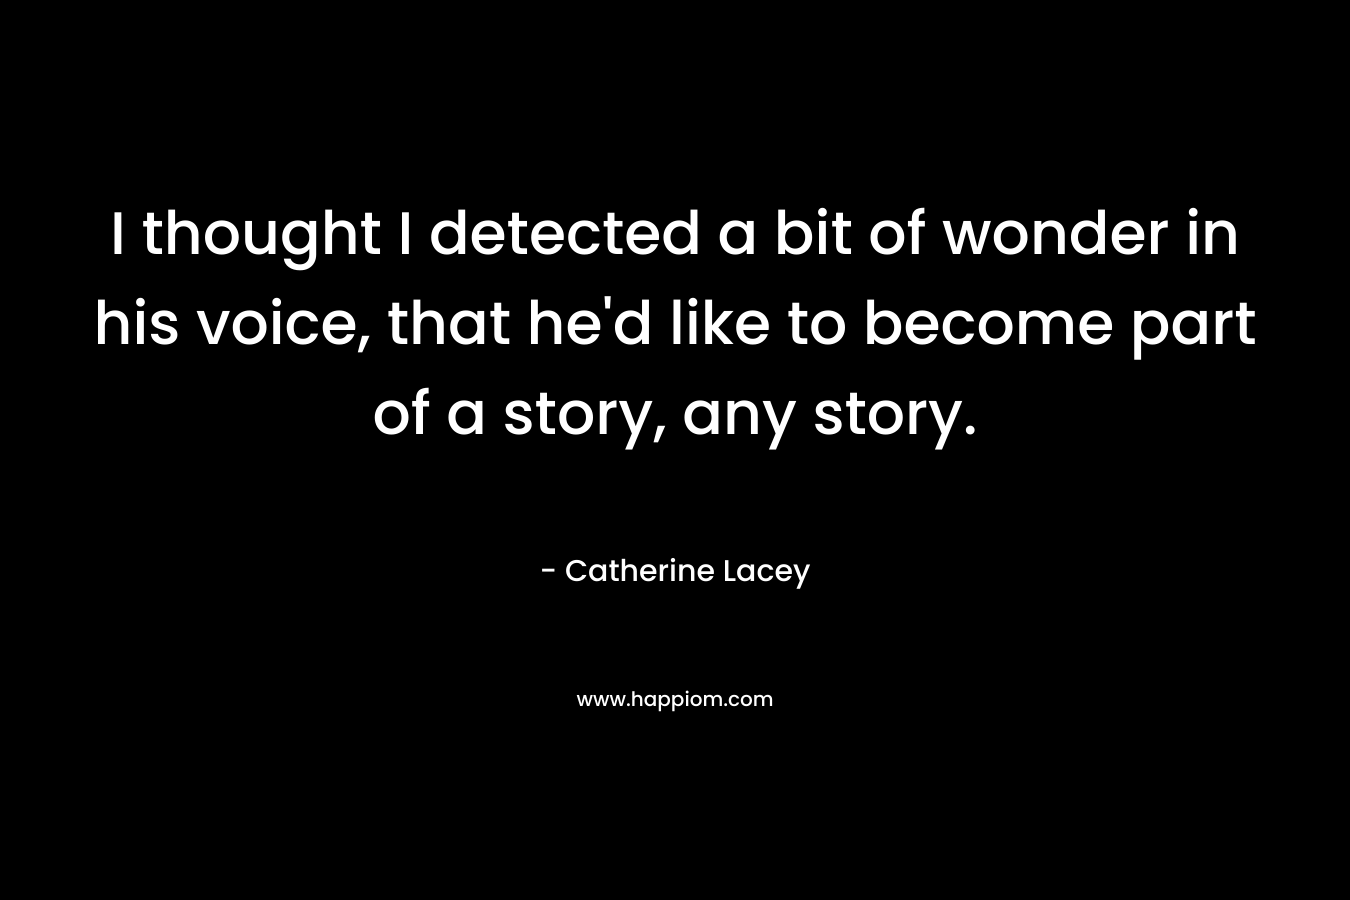 I thought I detected a bit of wonder in his voice, that he'd like to become part of a story, any story.